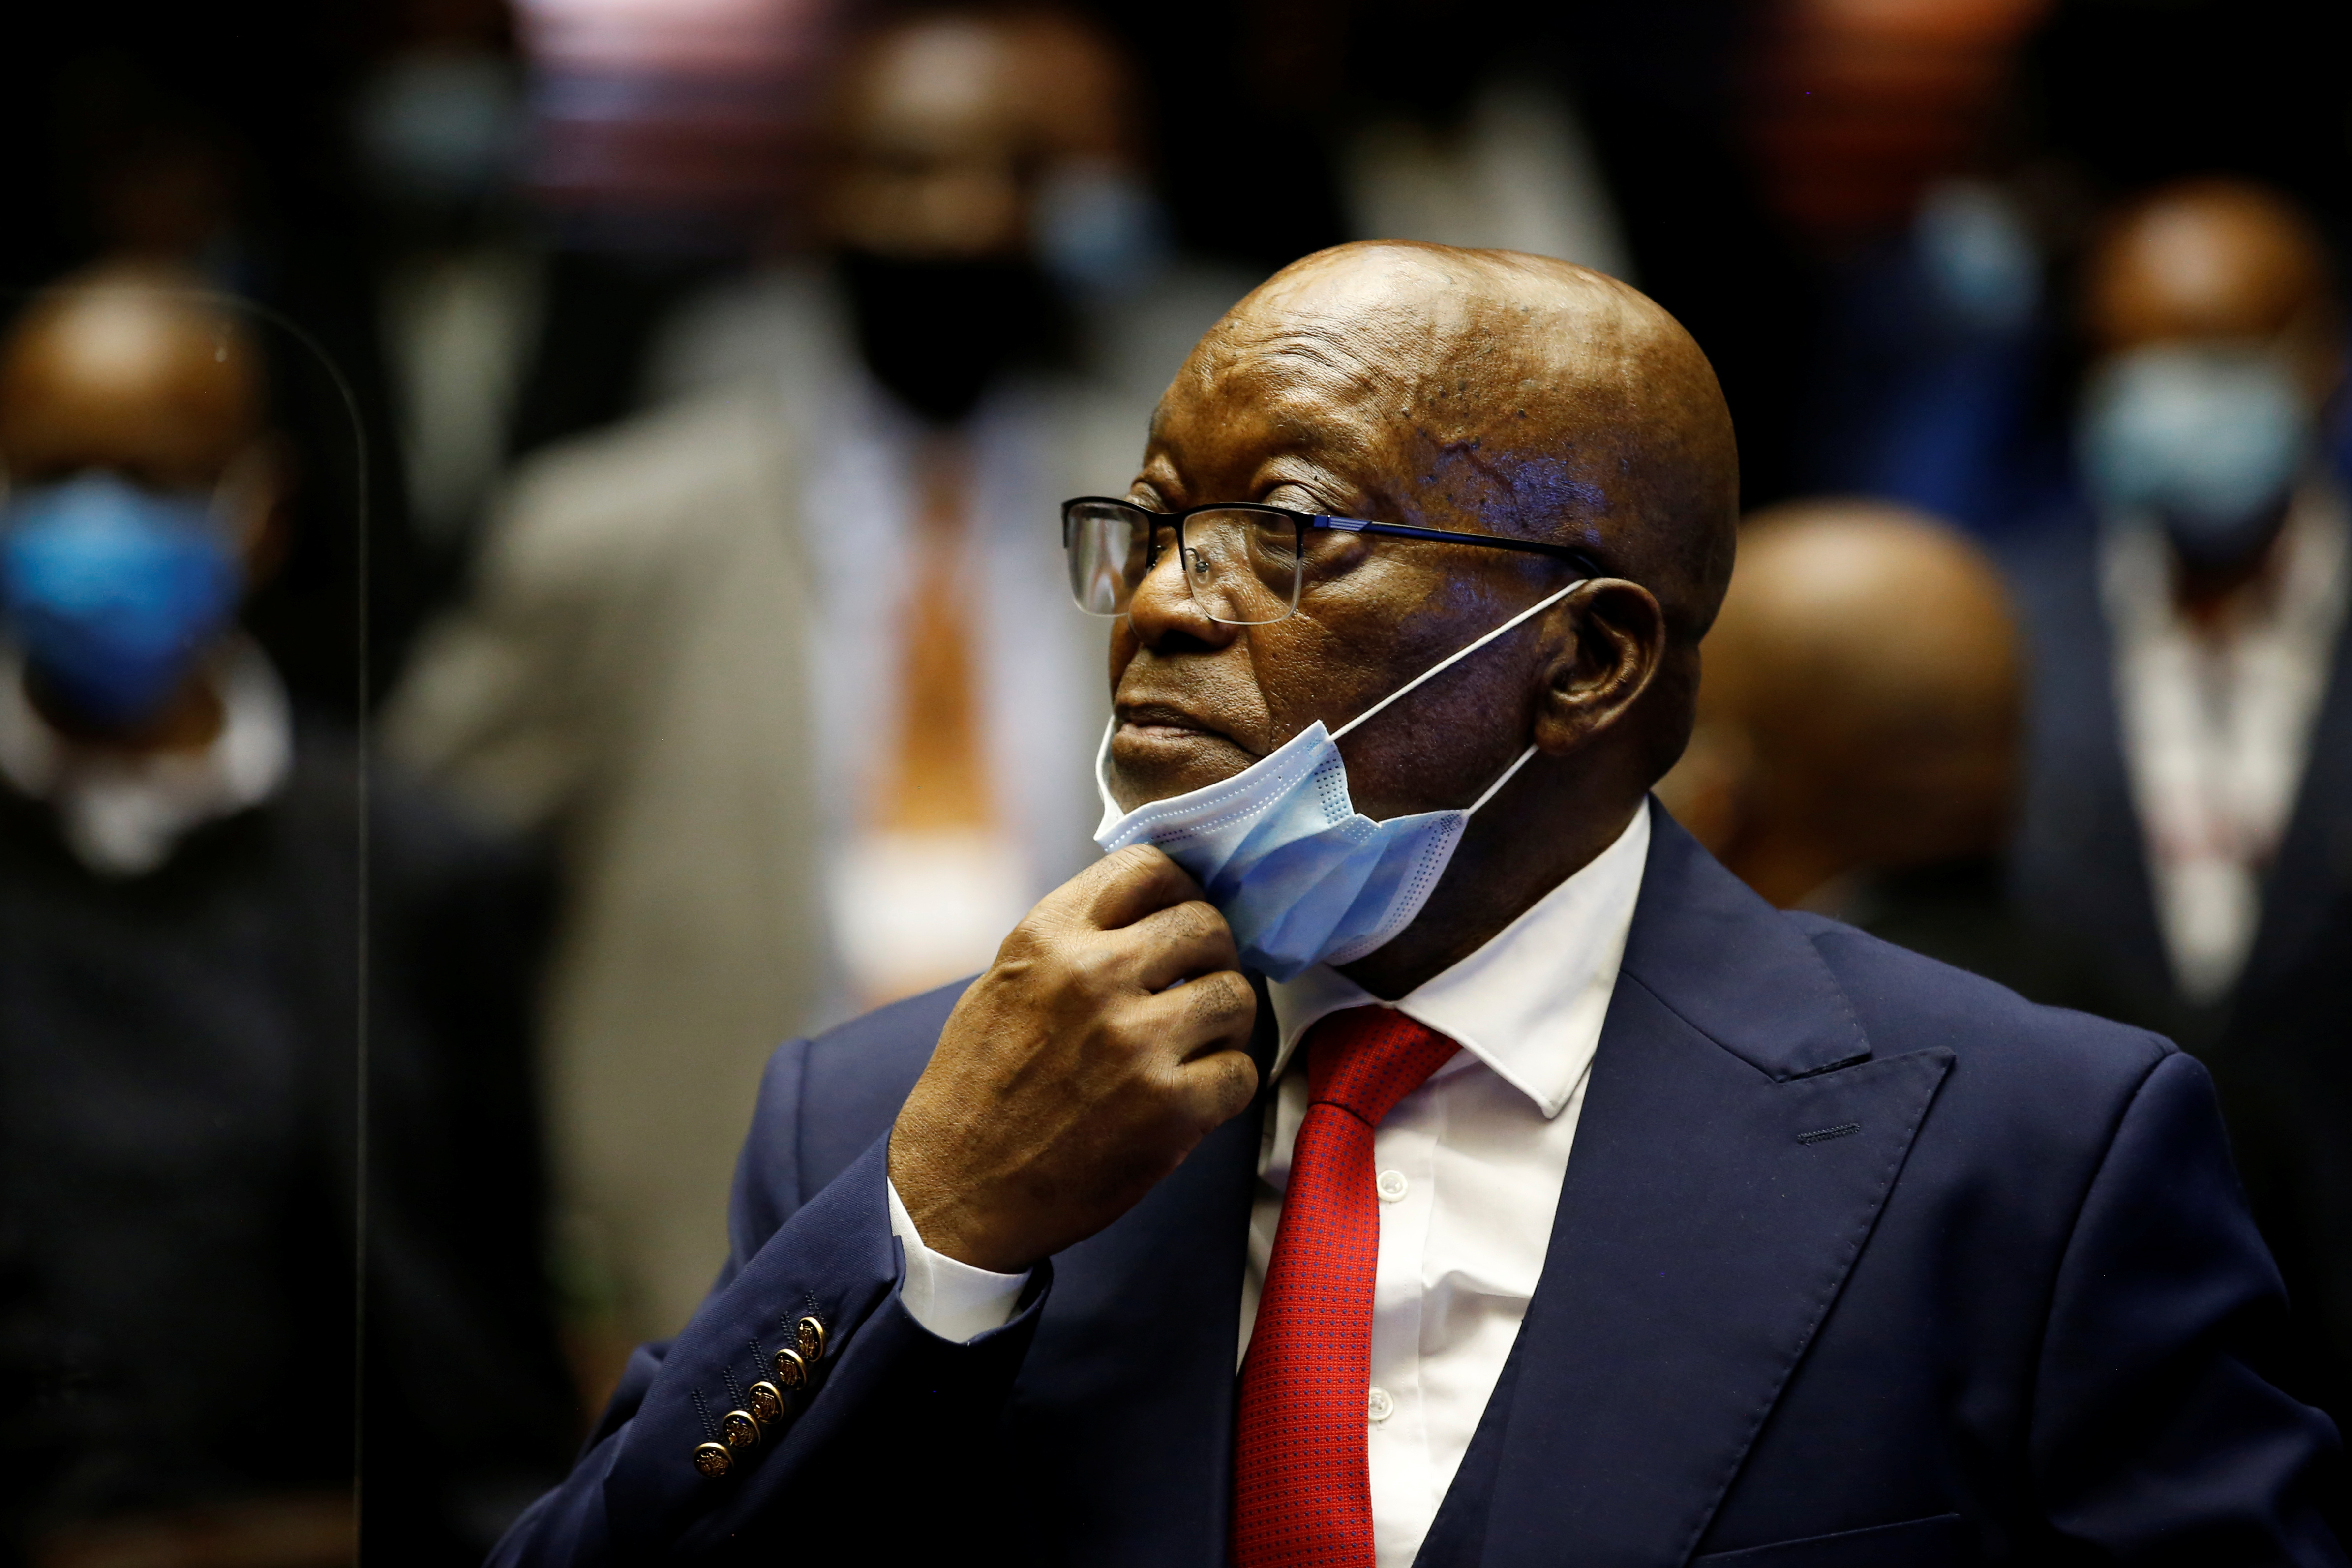 Former South African President Jacob Zuma stands in the dock after recess in his corruption trial in Pietermaritzburg